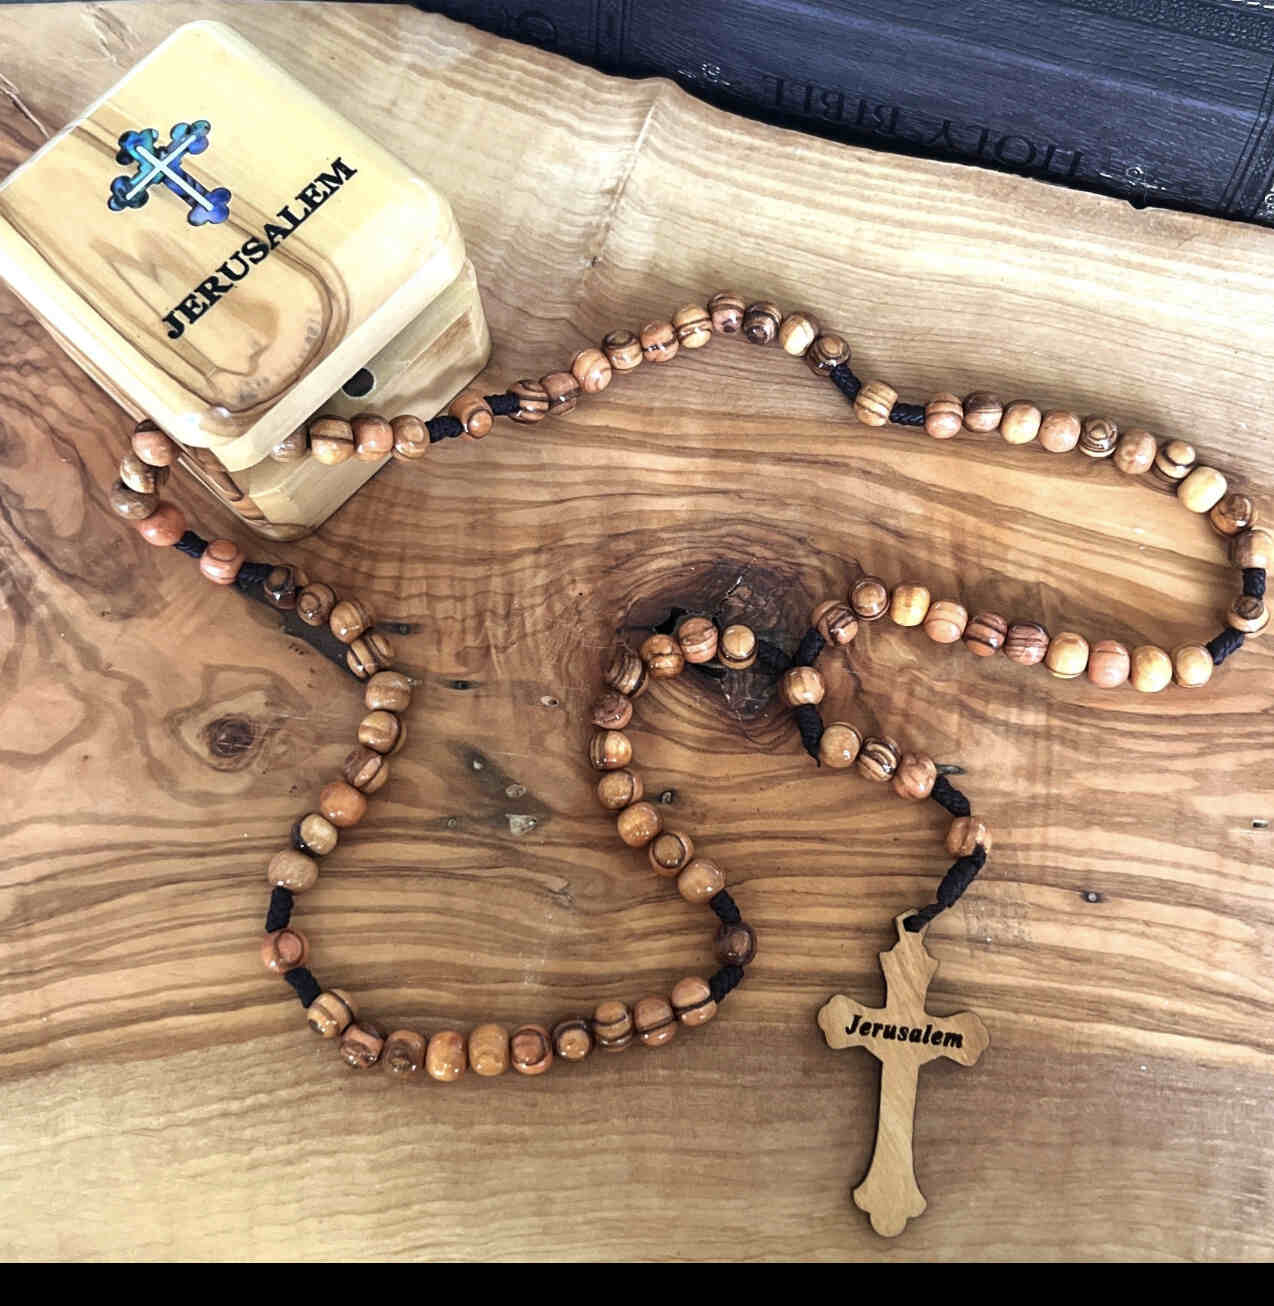 7 Decade Wooden Rosary, Seven decades of Olive Wood Beads on Cord Rope